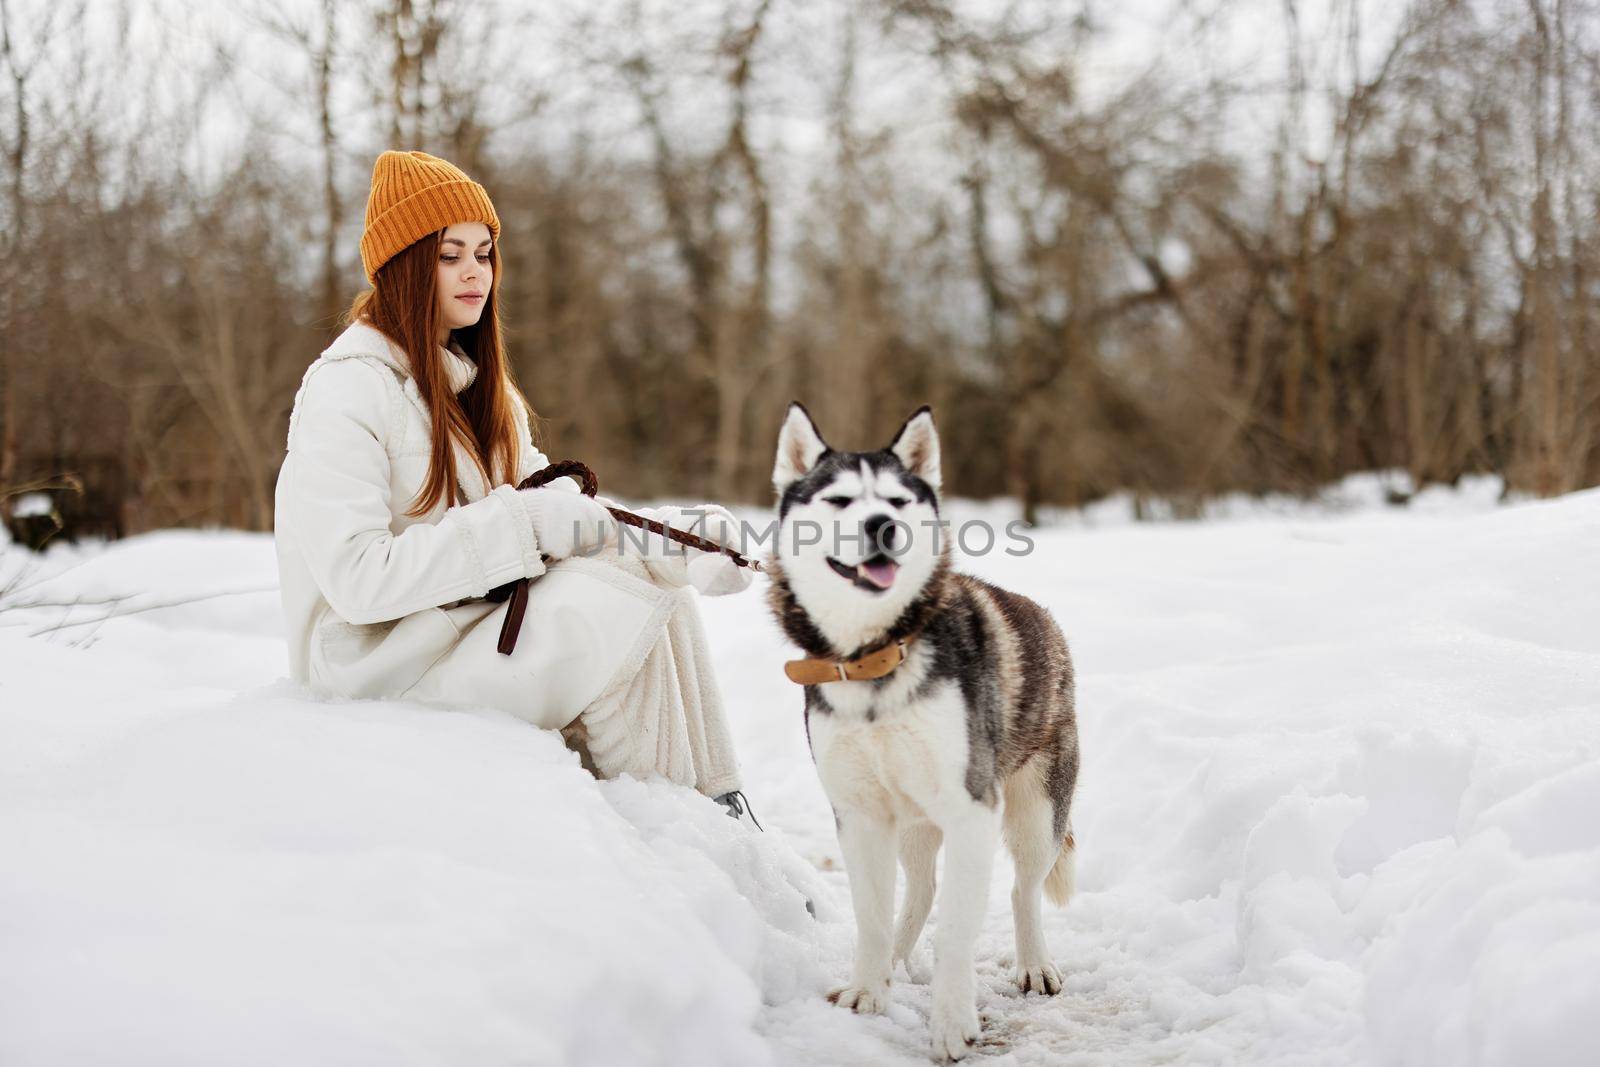 portrait of a woman in the snow playing with a dog outdoors friendship winter holidays by SHOTPRIME